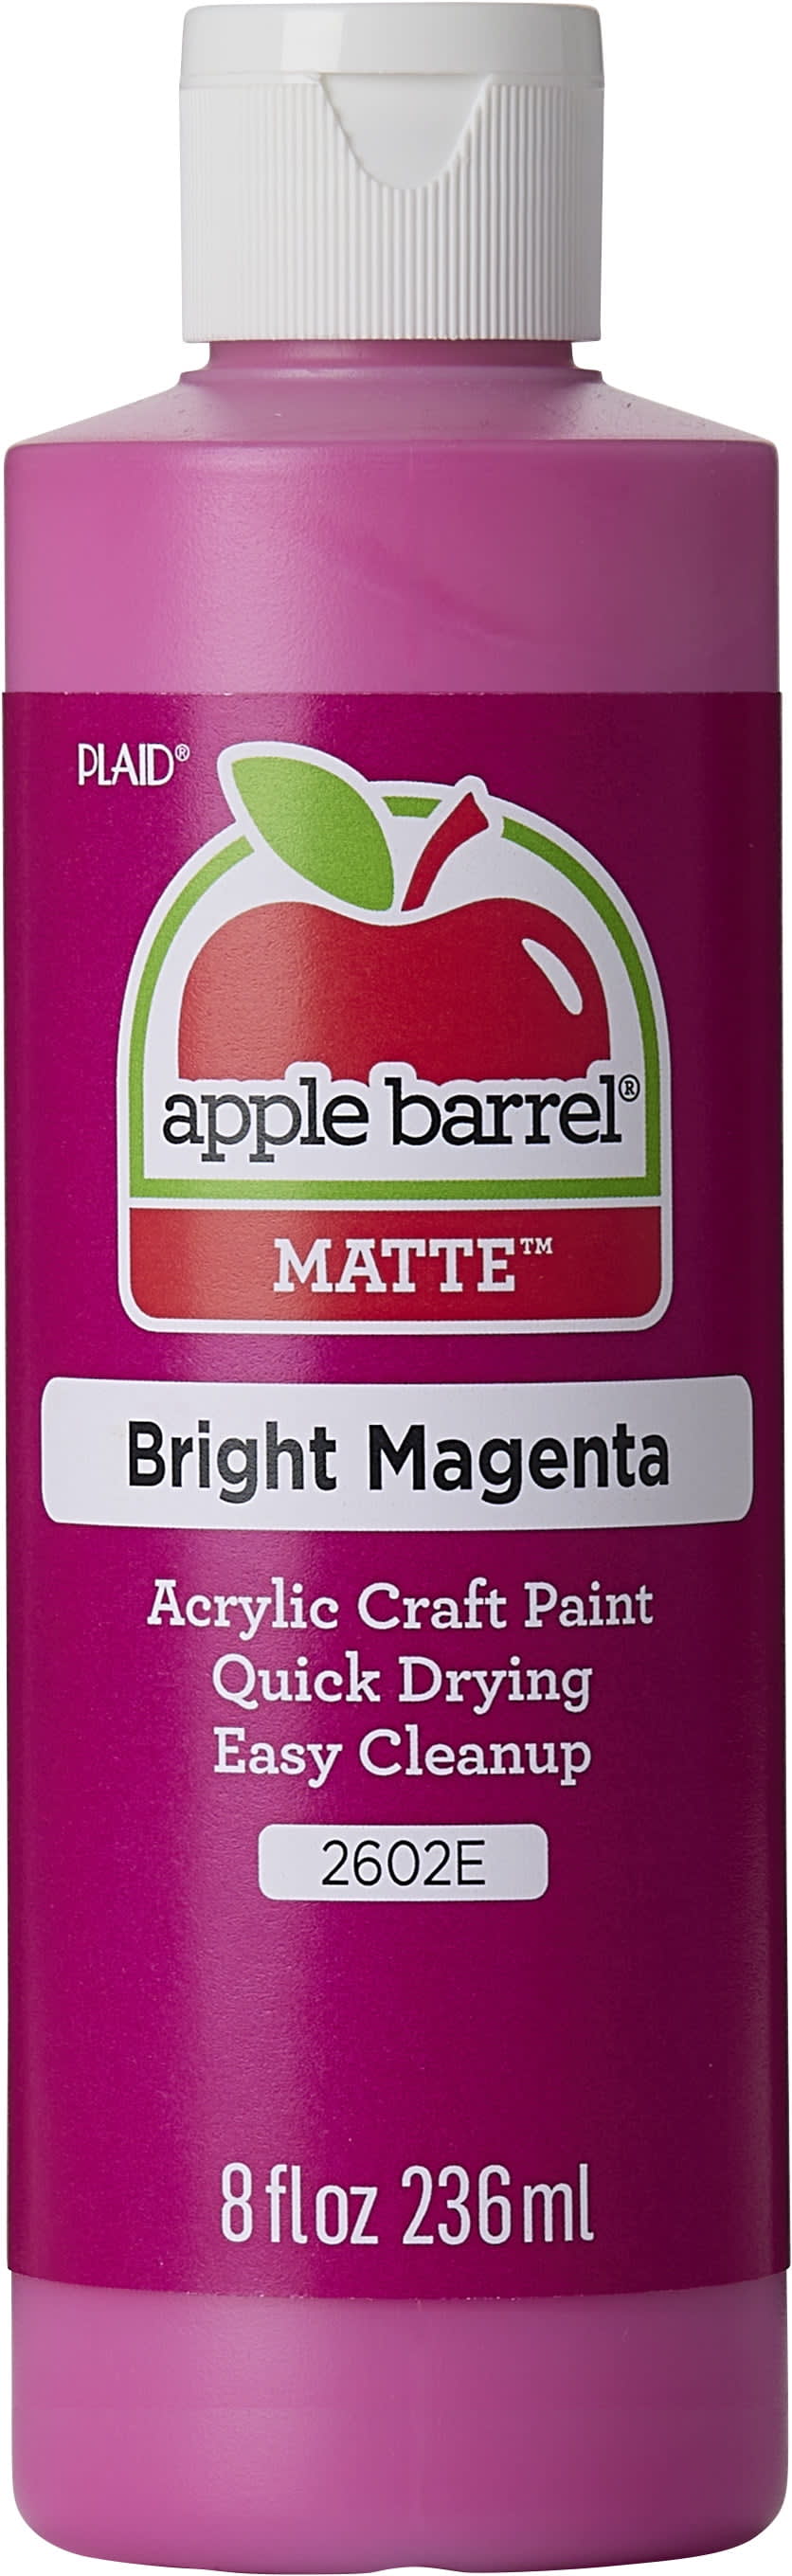  Acrylic Paint - Apple Barrel 12 pack of assorted colors - 2 oz.  each : Arts, Crafts & Sewing